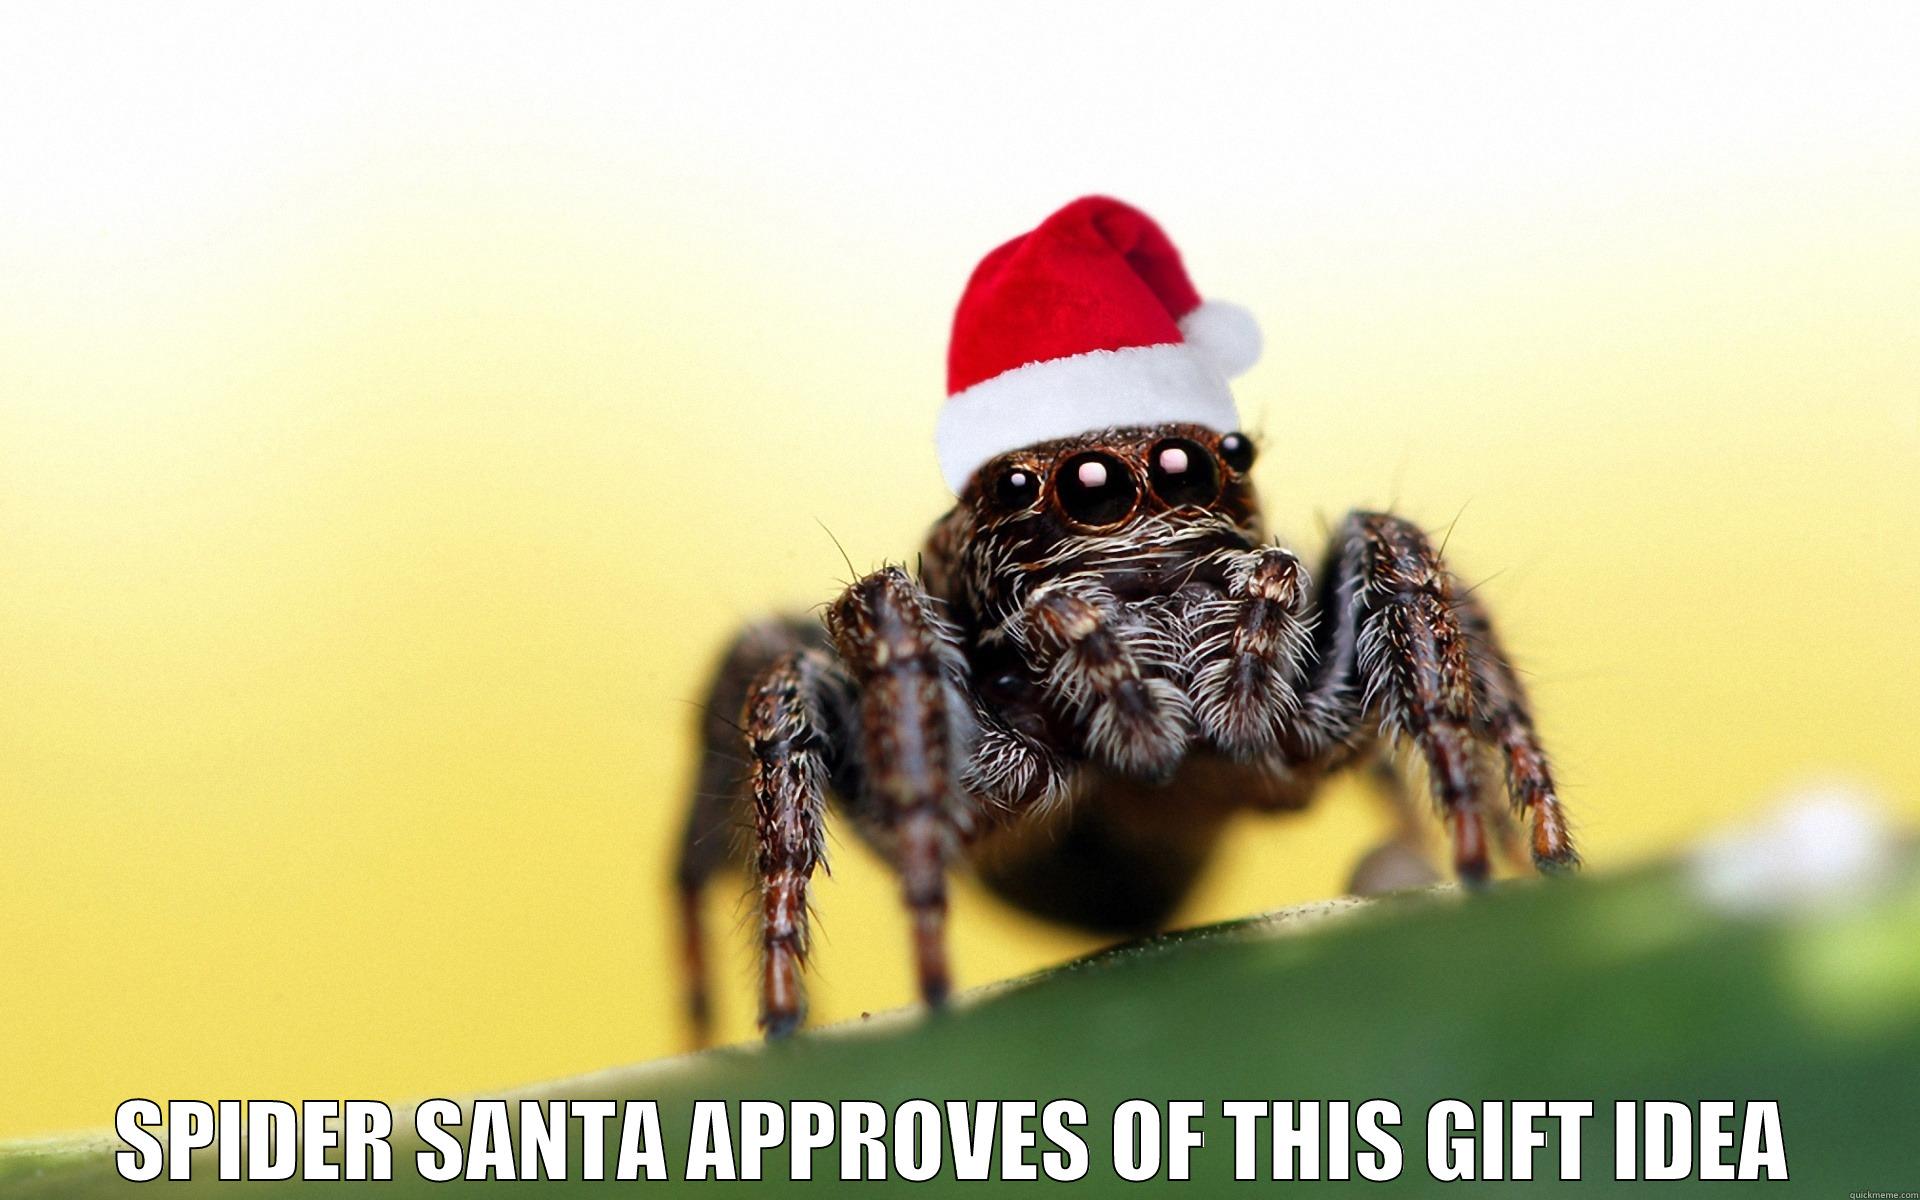  SPIDER SANTA APPROVES OF THIS GIFT IDEA Misc